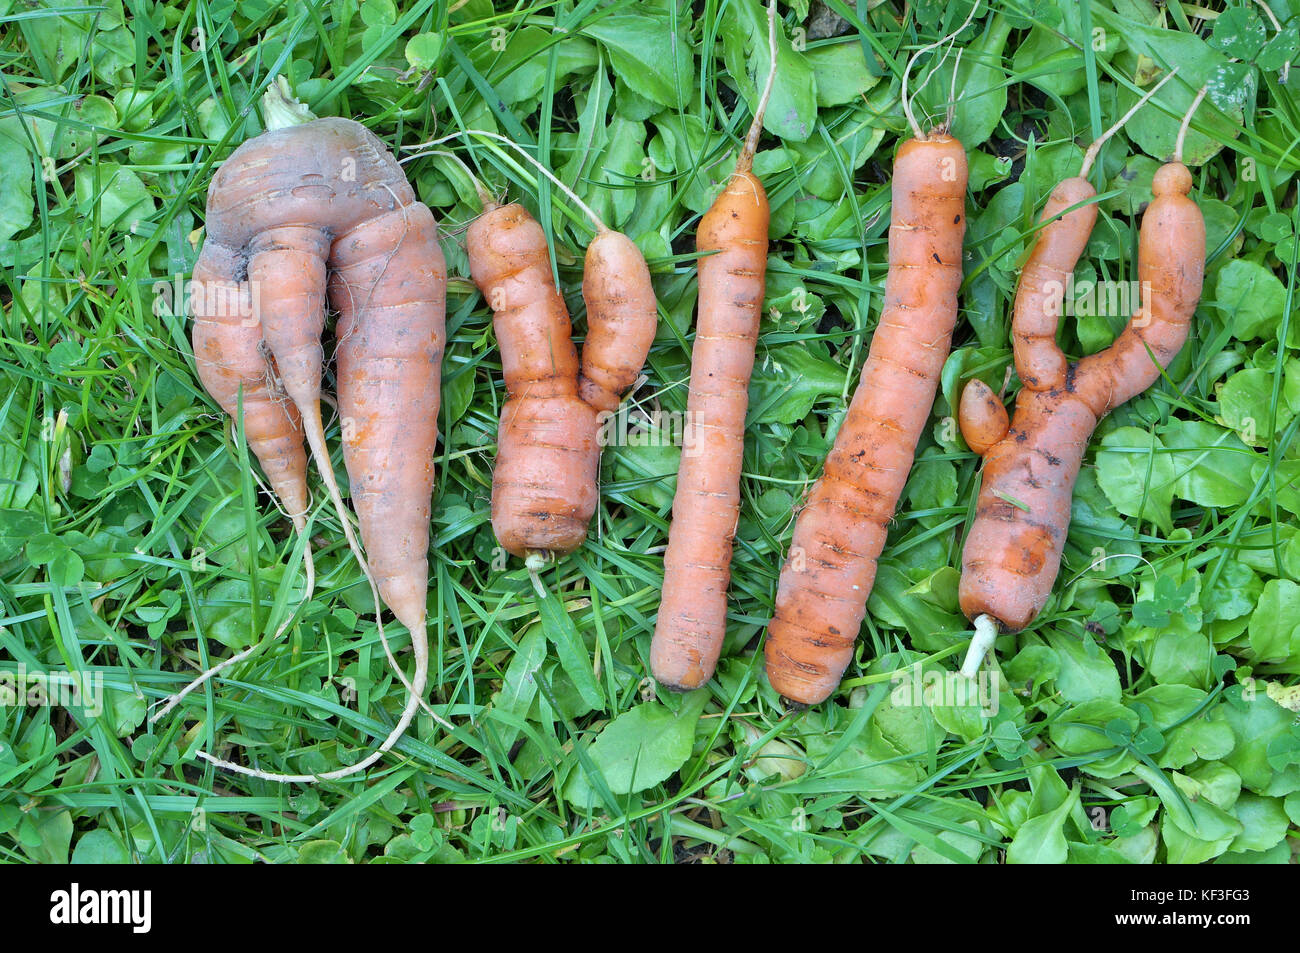 The abstract word 'MYLLY' is made from ugly carrots on green grass Stock Photo